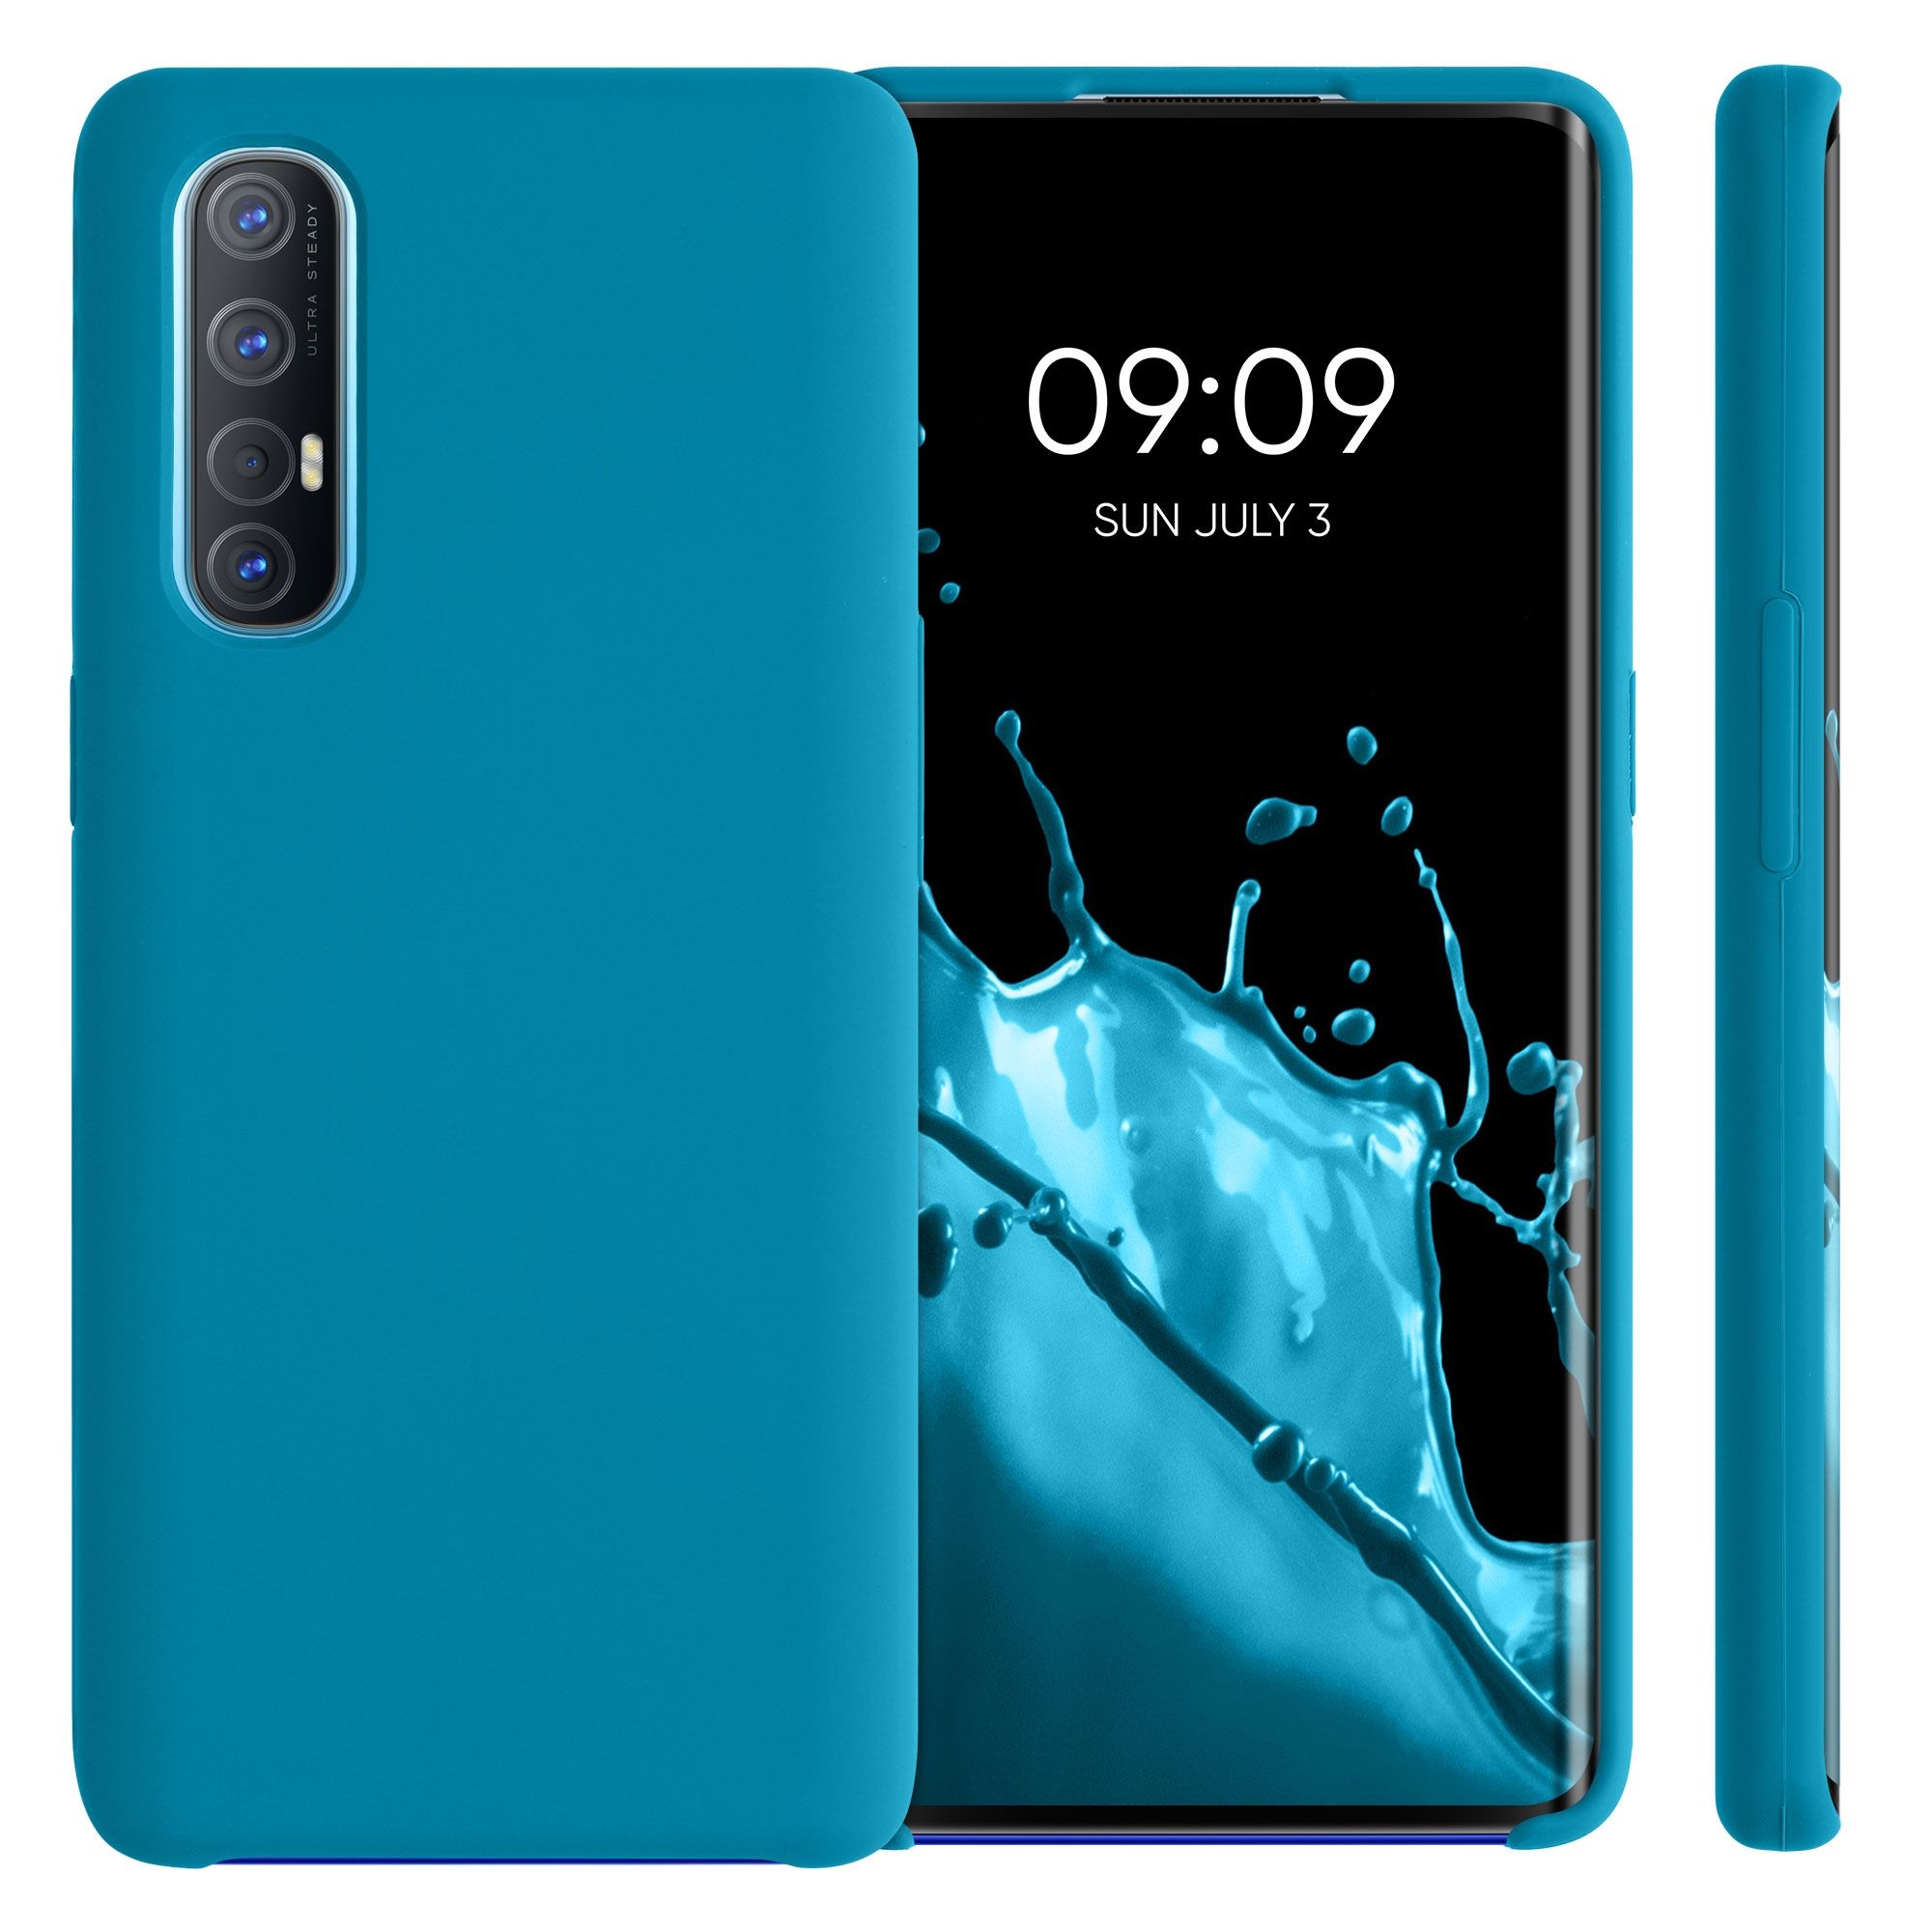 kw-mobile-thiki-silikonis-oppo-find-x2-neo-soft-flexible-rubber-cover-caribbean-blue.jpg